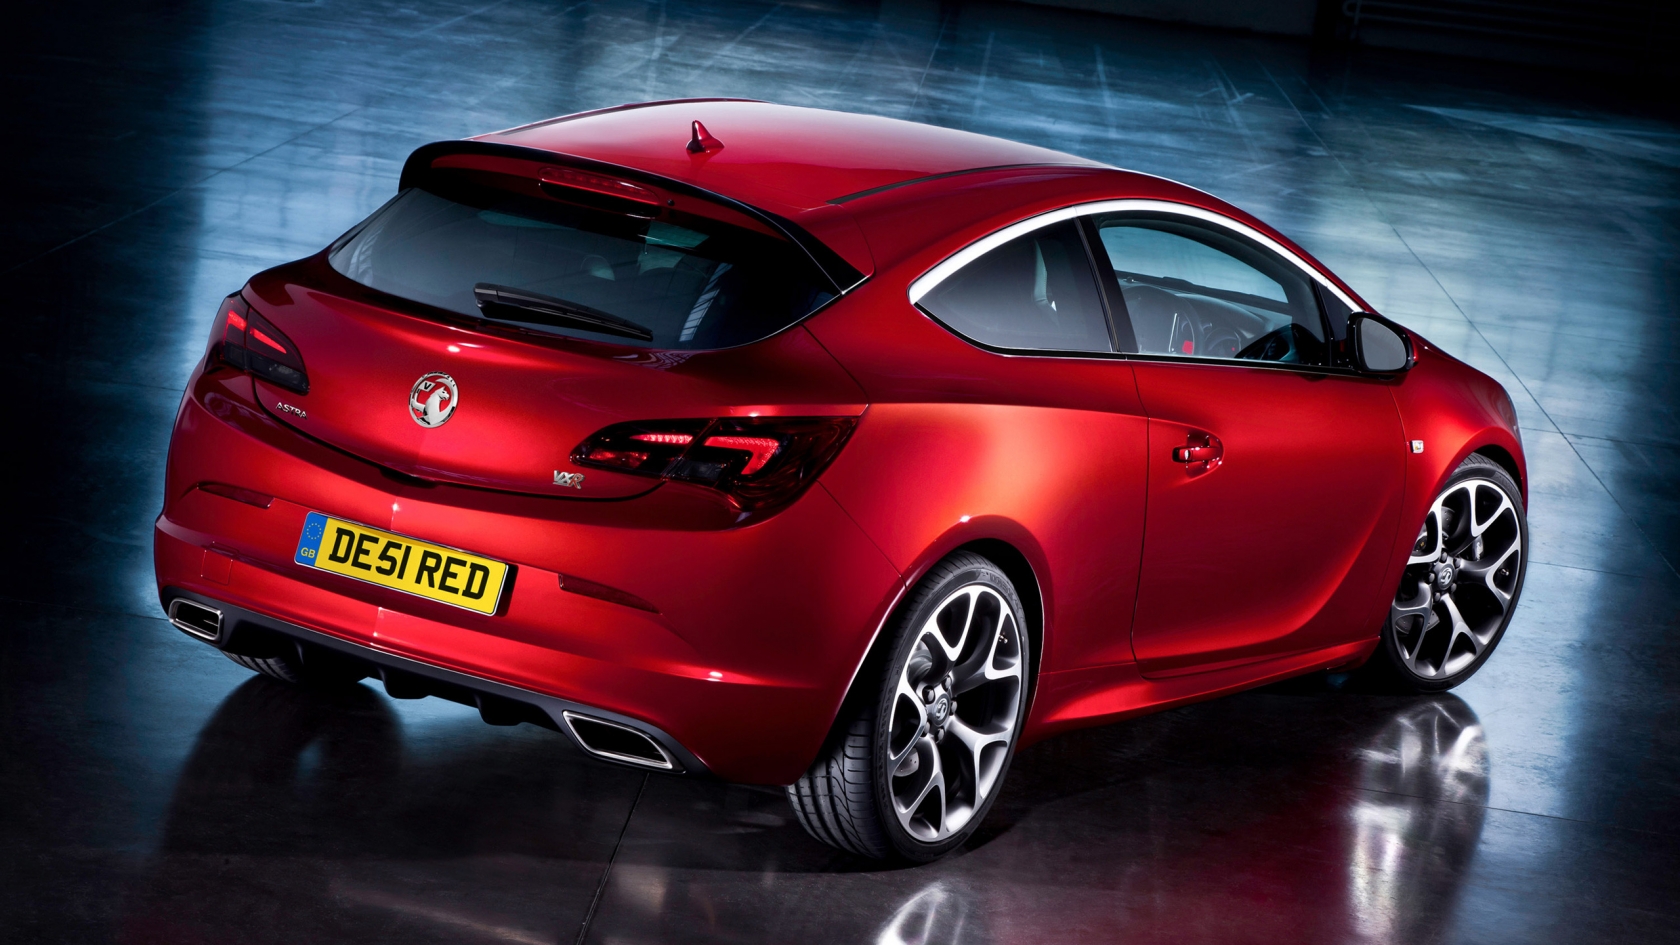 Vauxhall Astra GTC Rear for 1680 x 945 HDTV resolution